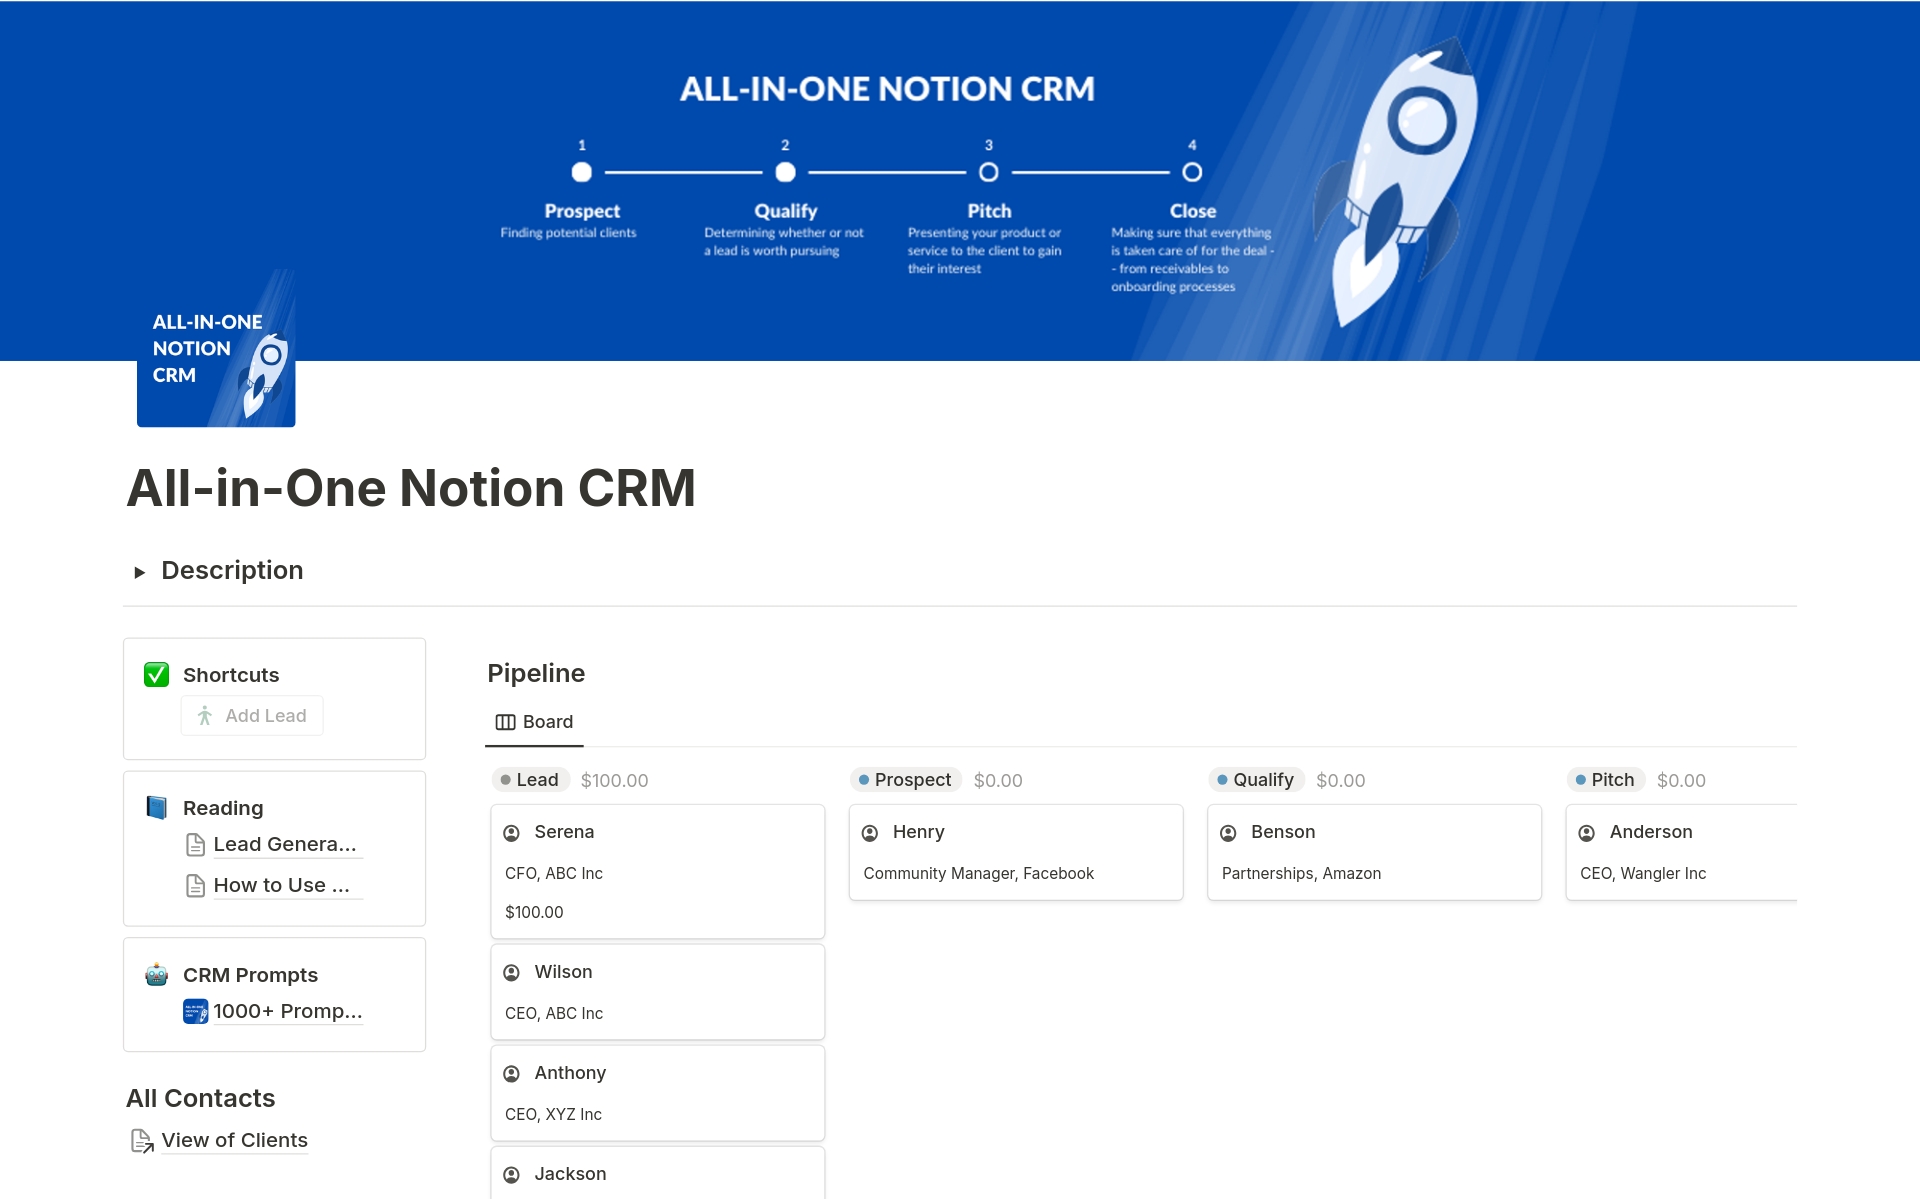 🤝 Supercharge Your CRM Efforts with Our "All-in-One Notion CRM" Template! 🚀

The "All-in-One Notion CRM" template is a comprehensive and versatile resource designed to streamline and enhance your customer relationship management efforts.